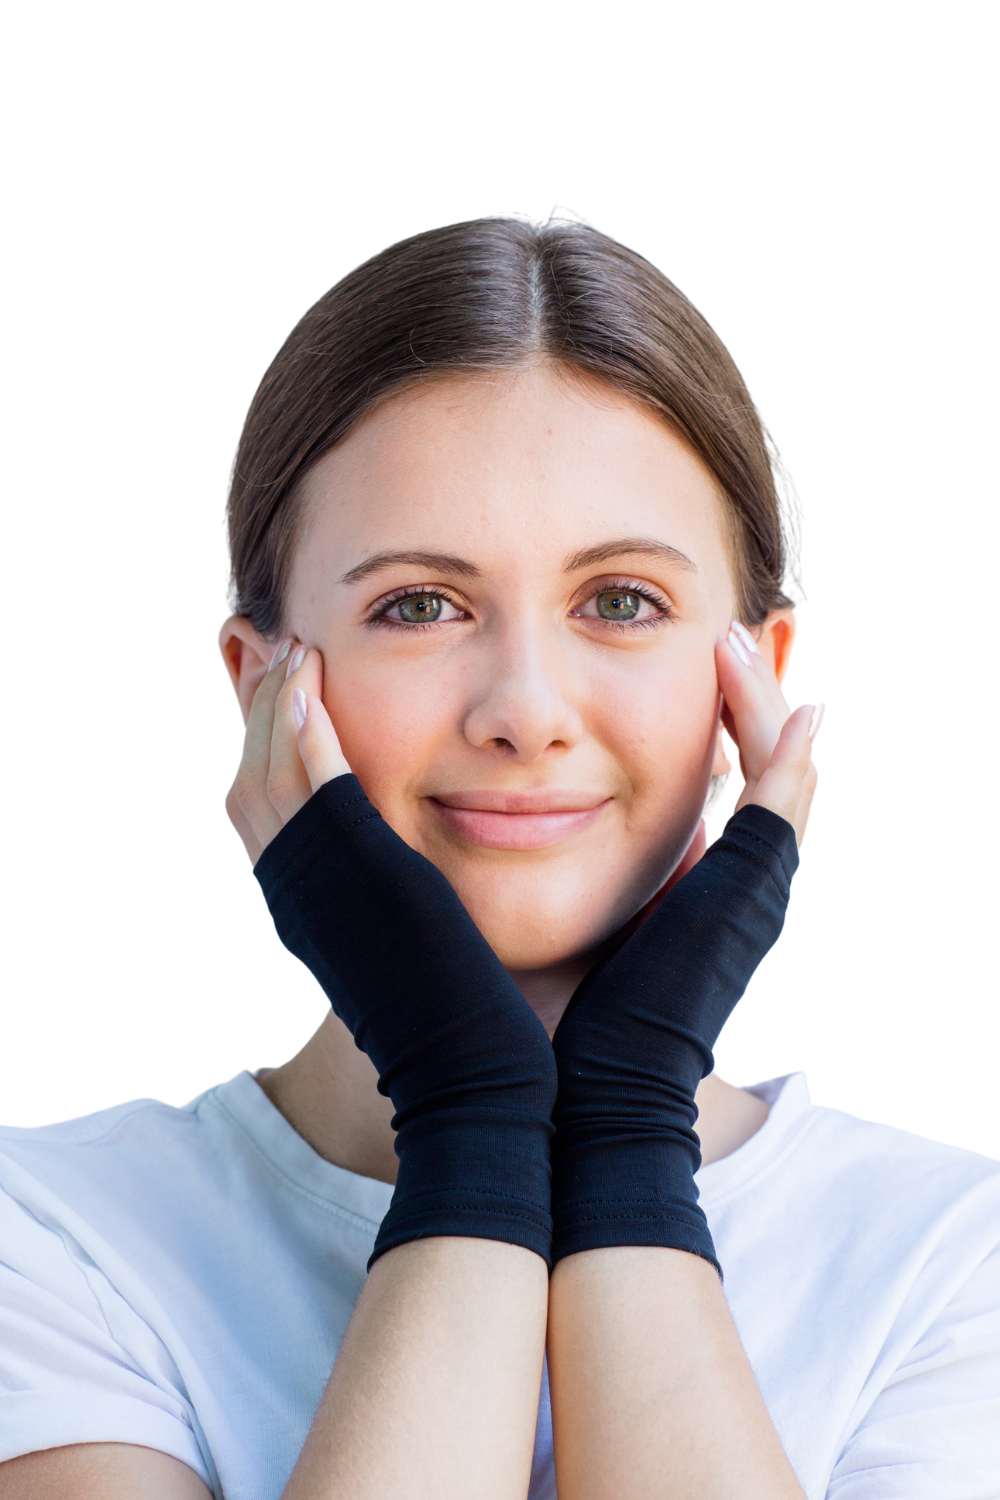 Woman holding hands at face - fingerless gloves